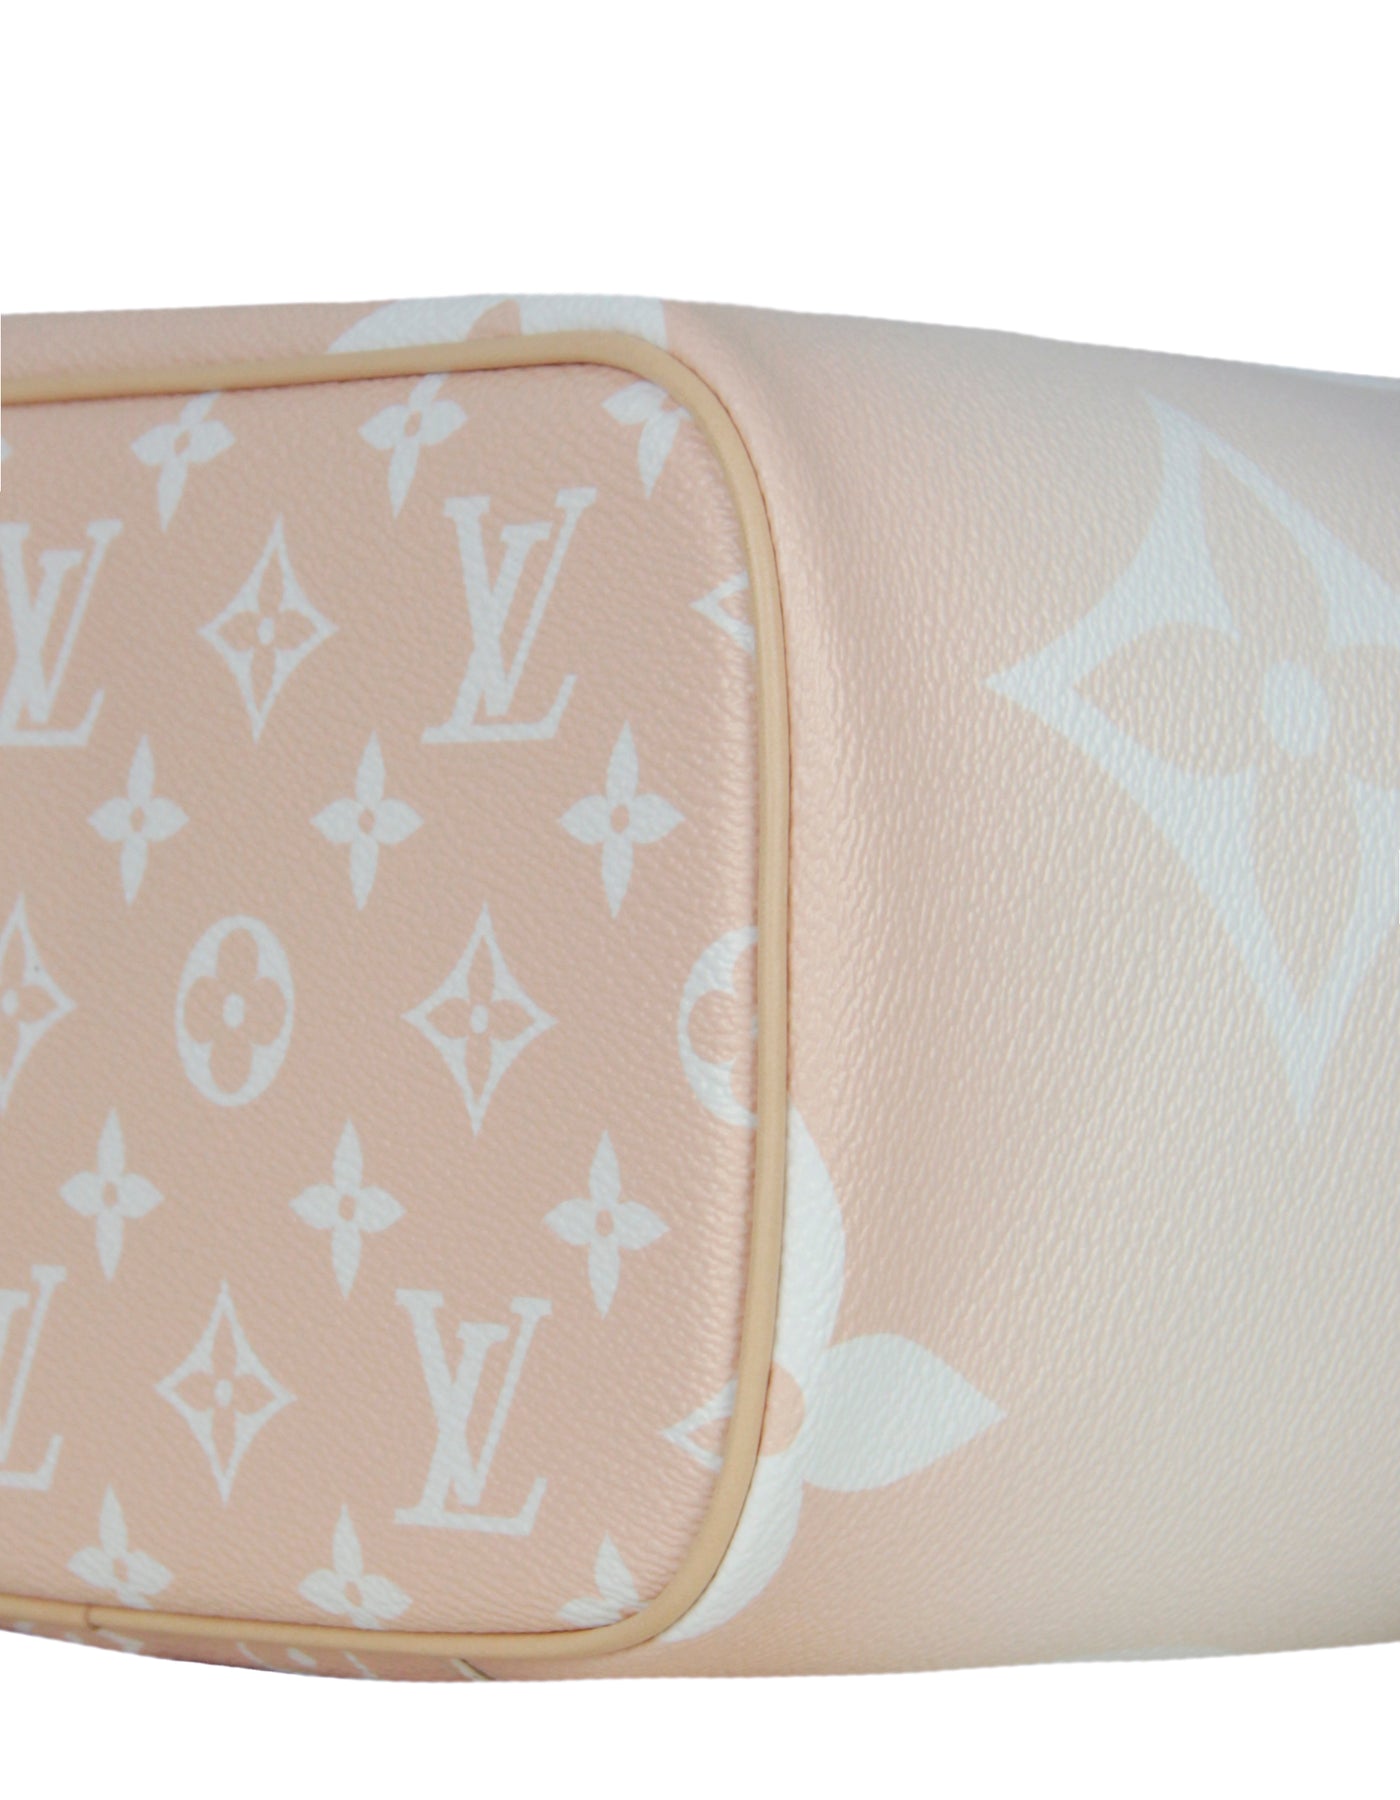 Louis Vuitton Nice Vanity Case By The Pool Monogram Giant BB Neutral 1459701